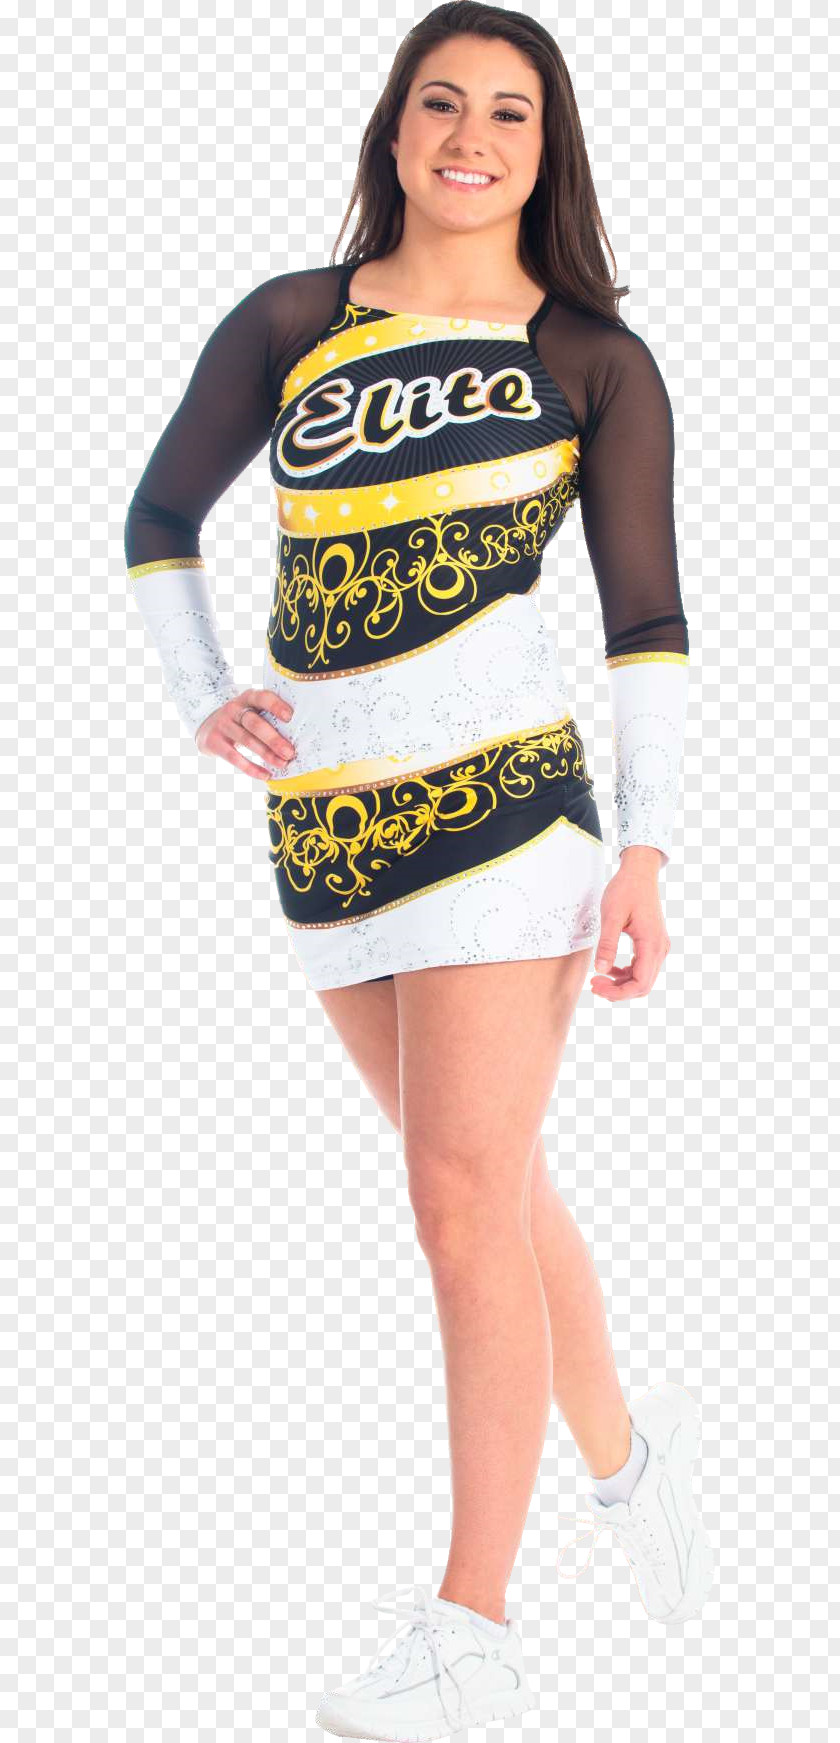 Sublimated Cheer Uniforms Cheerleading Clothing Sportswear PNG